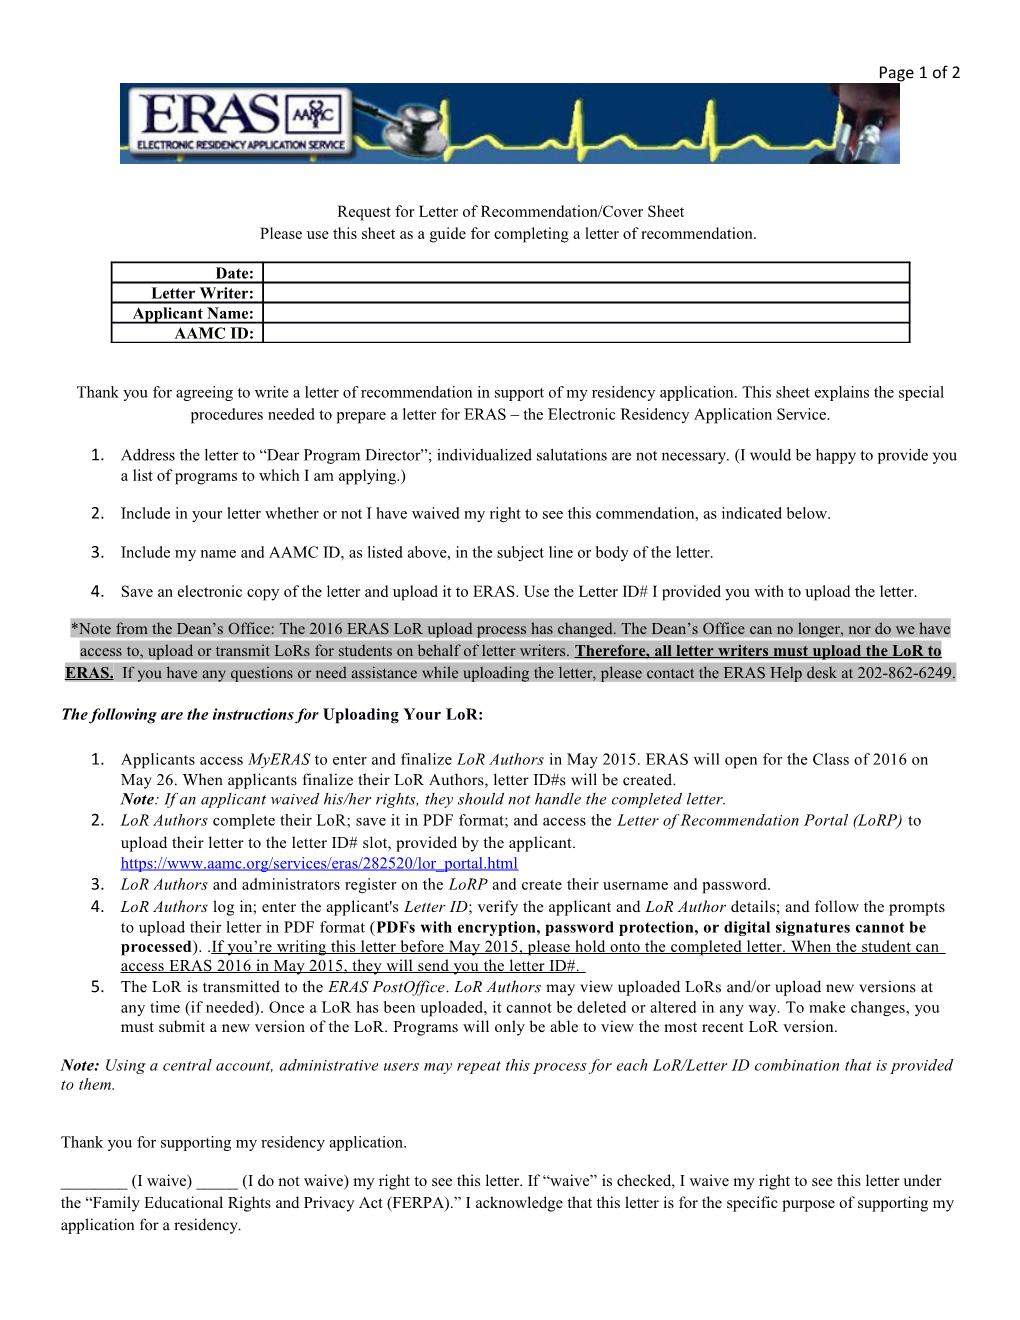 Request for Letter of Recommendation/Cover Sheet Please Use This Sheet As a Guide for Completing